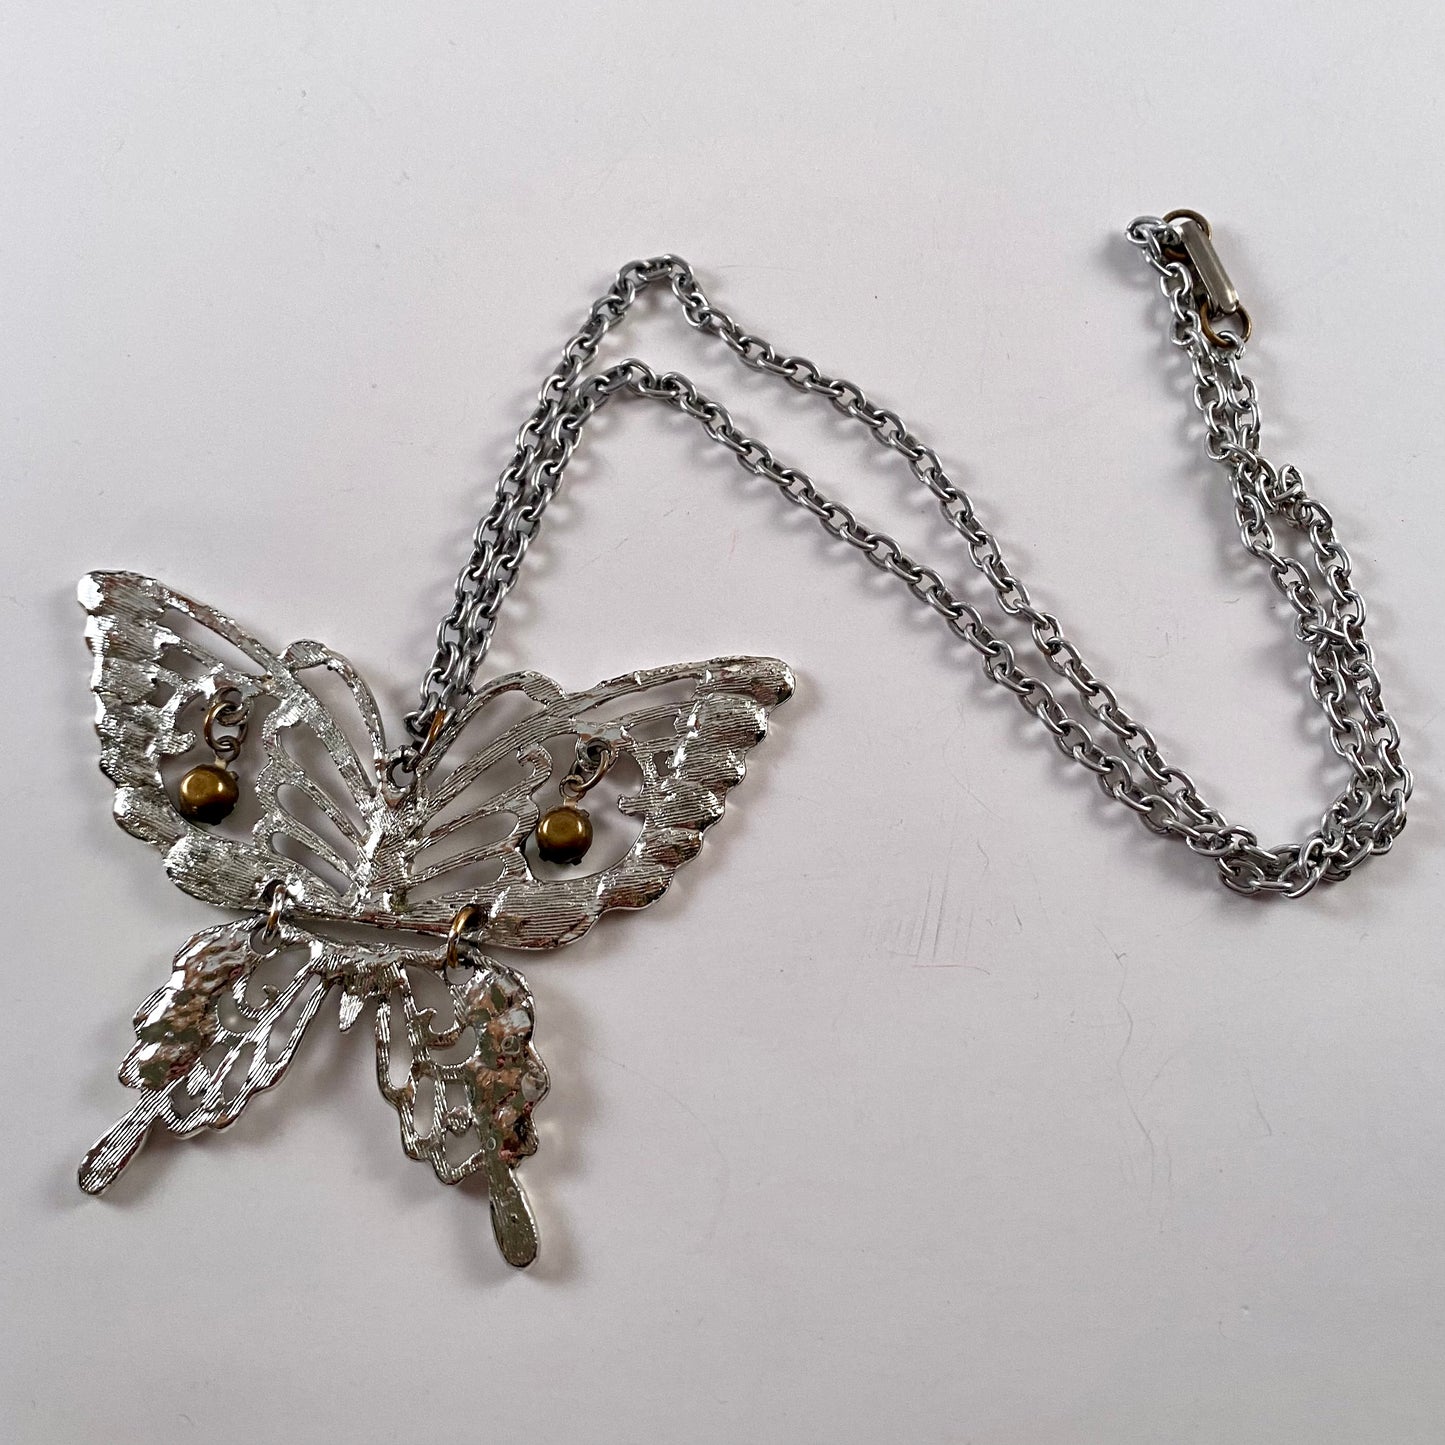 Late 60s/ Early 70s Articulated Butterfly Pendant Necklace